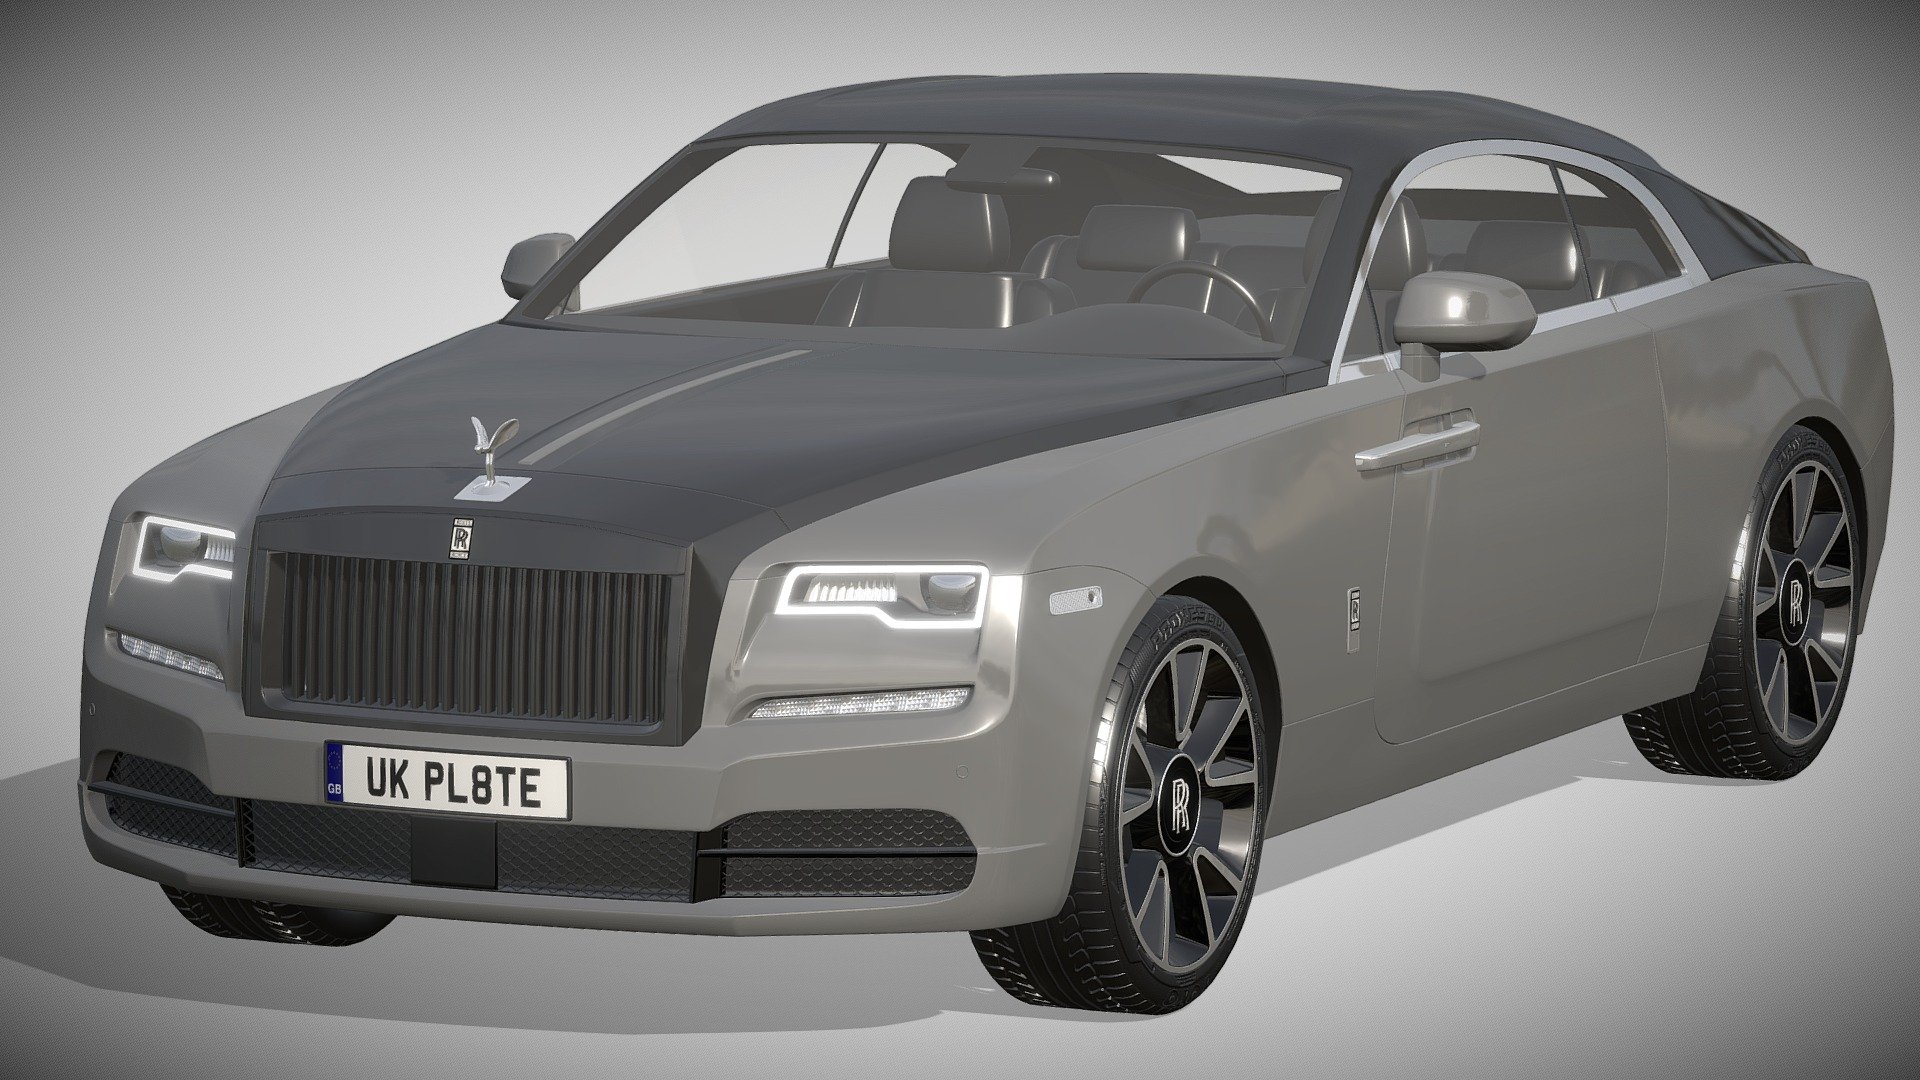 Rolls-Royce Wraith

https://www.rolls-roycemotorcars.com/en_GB/showroom/wraith-in-detail.html

Clean geometry Light weight model, yet completely detailed for HI-Res renders. Use for movies, Advertisements or games

Corona render and materials

All textures include in *.rar files

Lighting setup is not included in the file! - Rolls-Royce Wraith - Buy Royalty Free 3D model by zifir3d 3d model